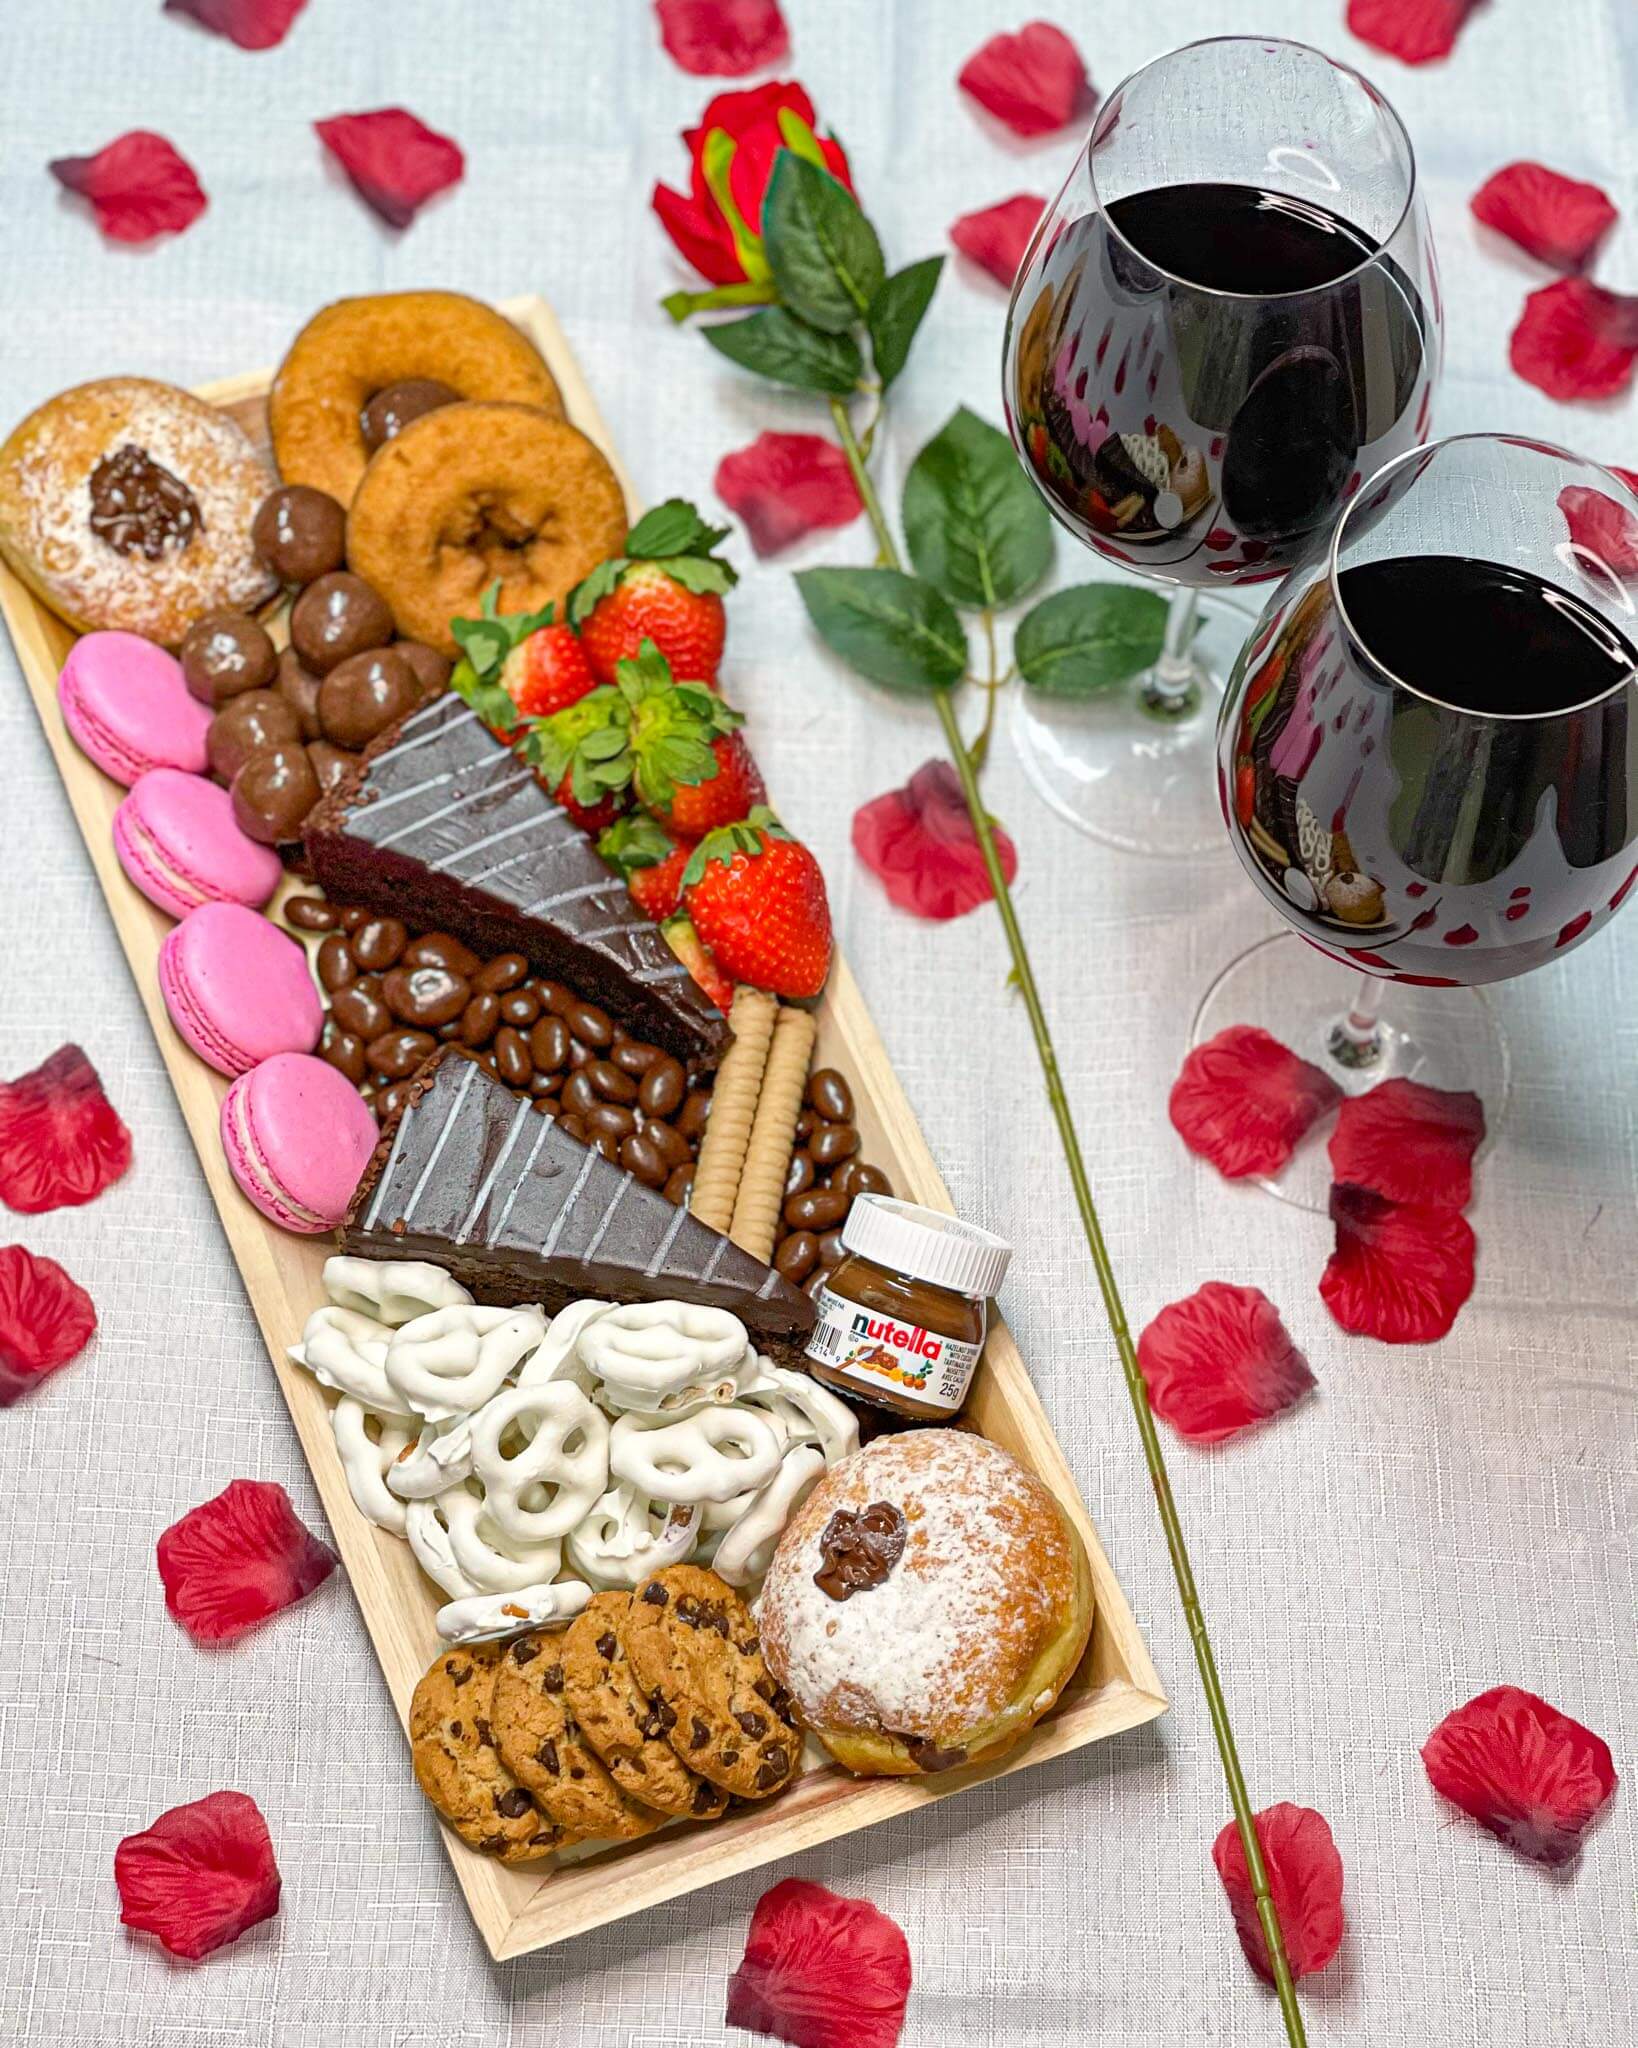 Cured catering valentine’s day dessert tray with donuts, macarons, cake and rose petals and wine